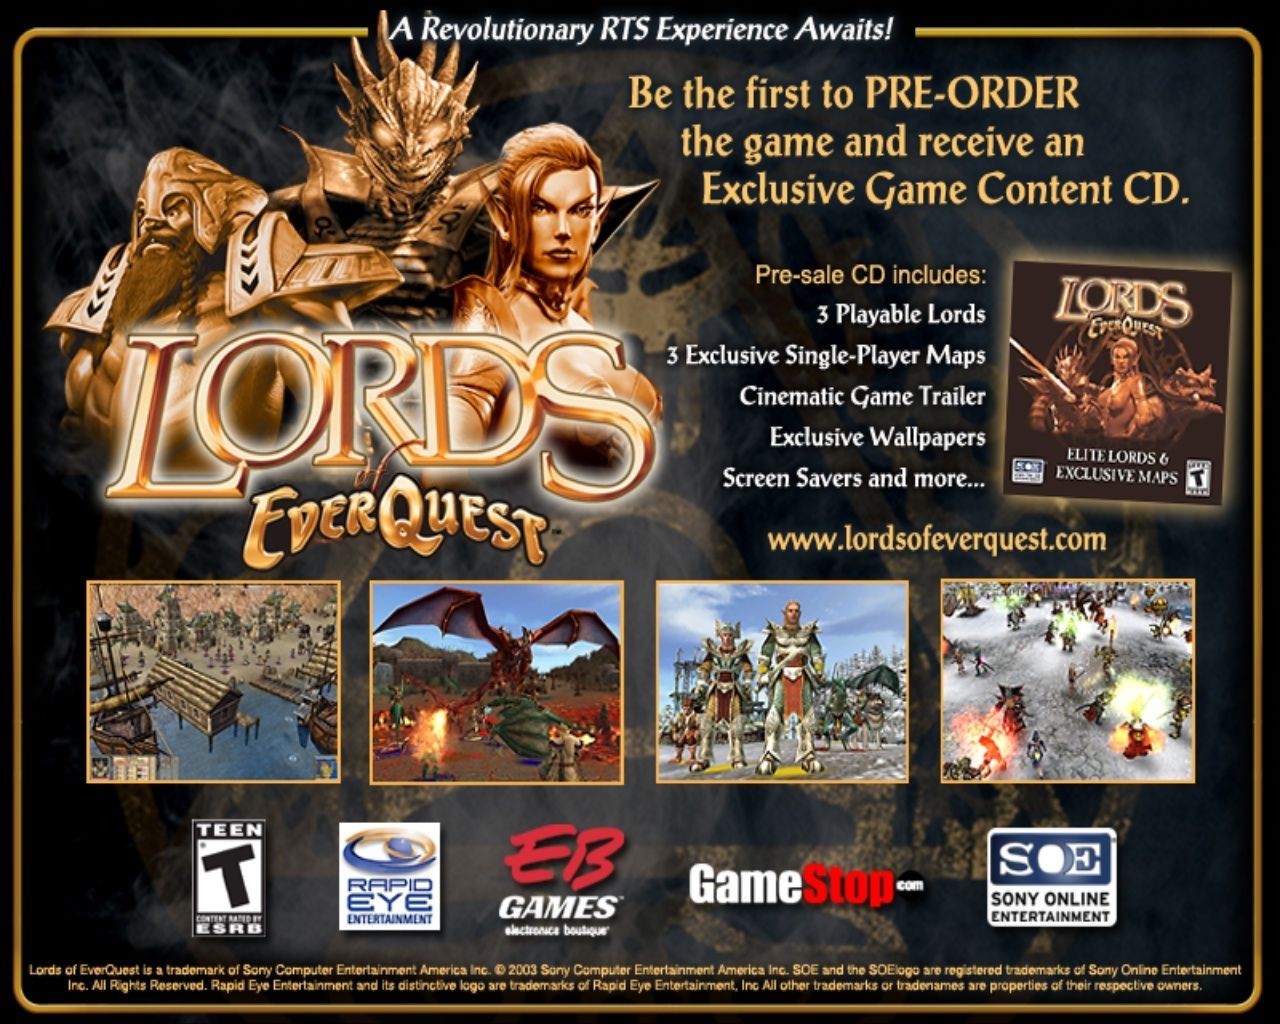 Lord of everquest steam фото 6